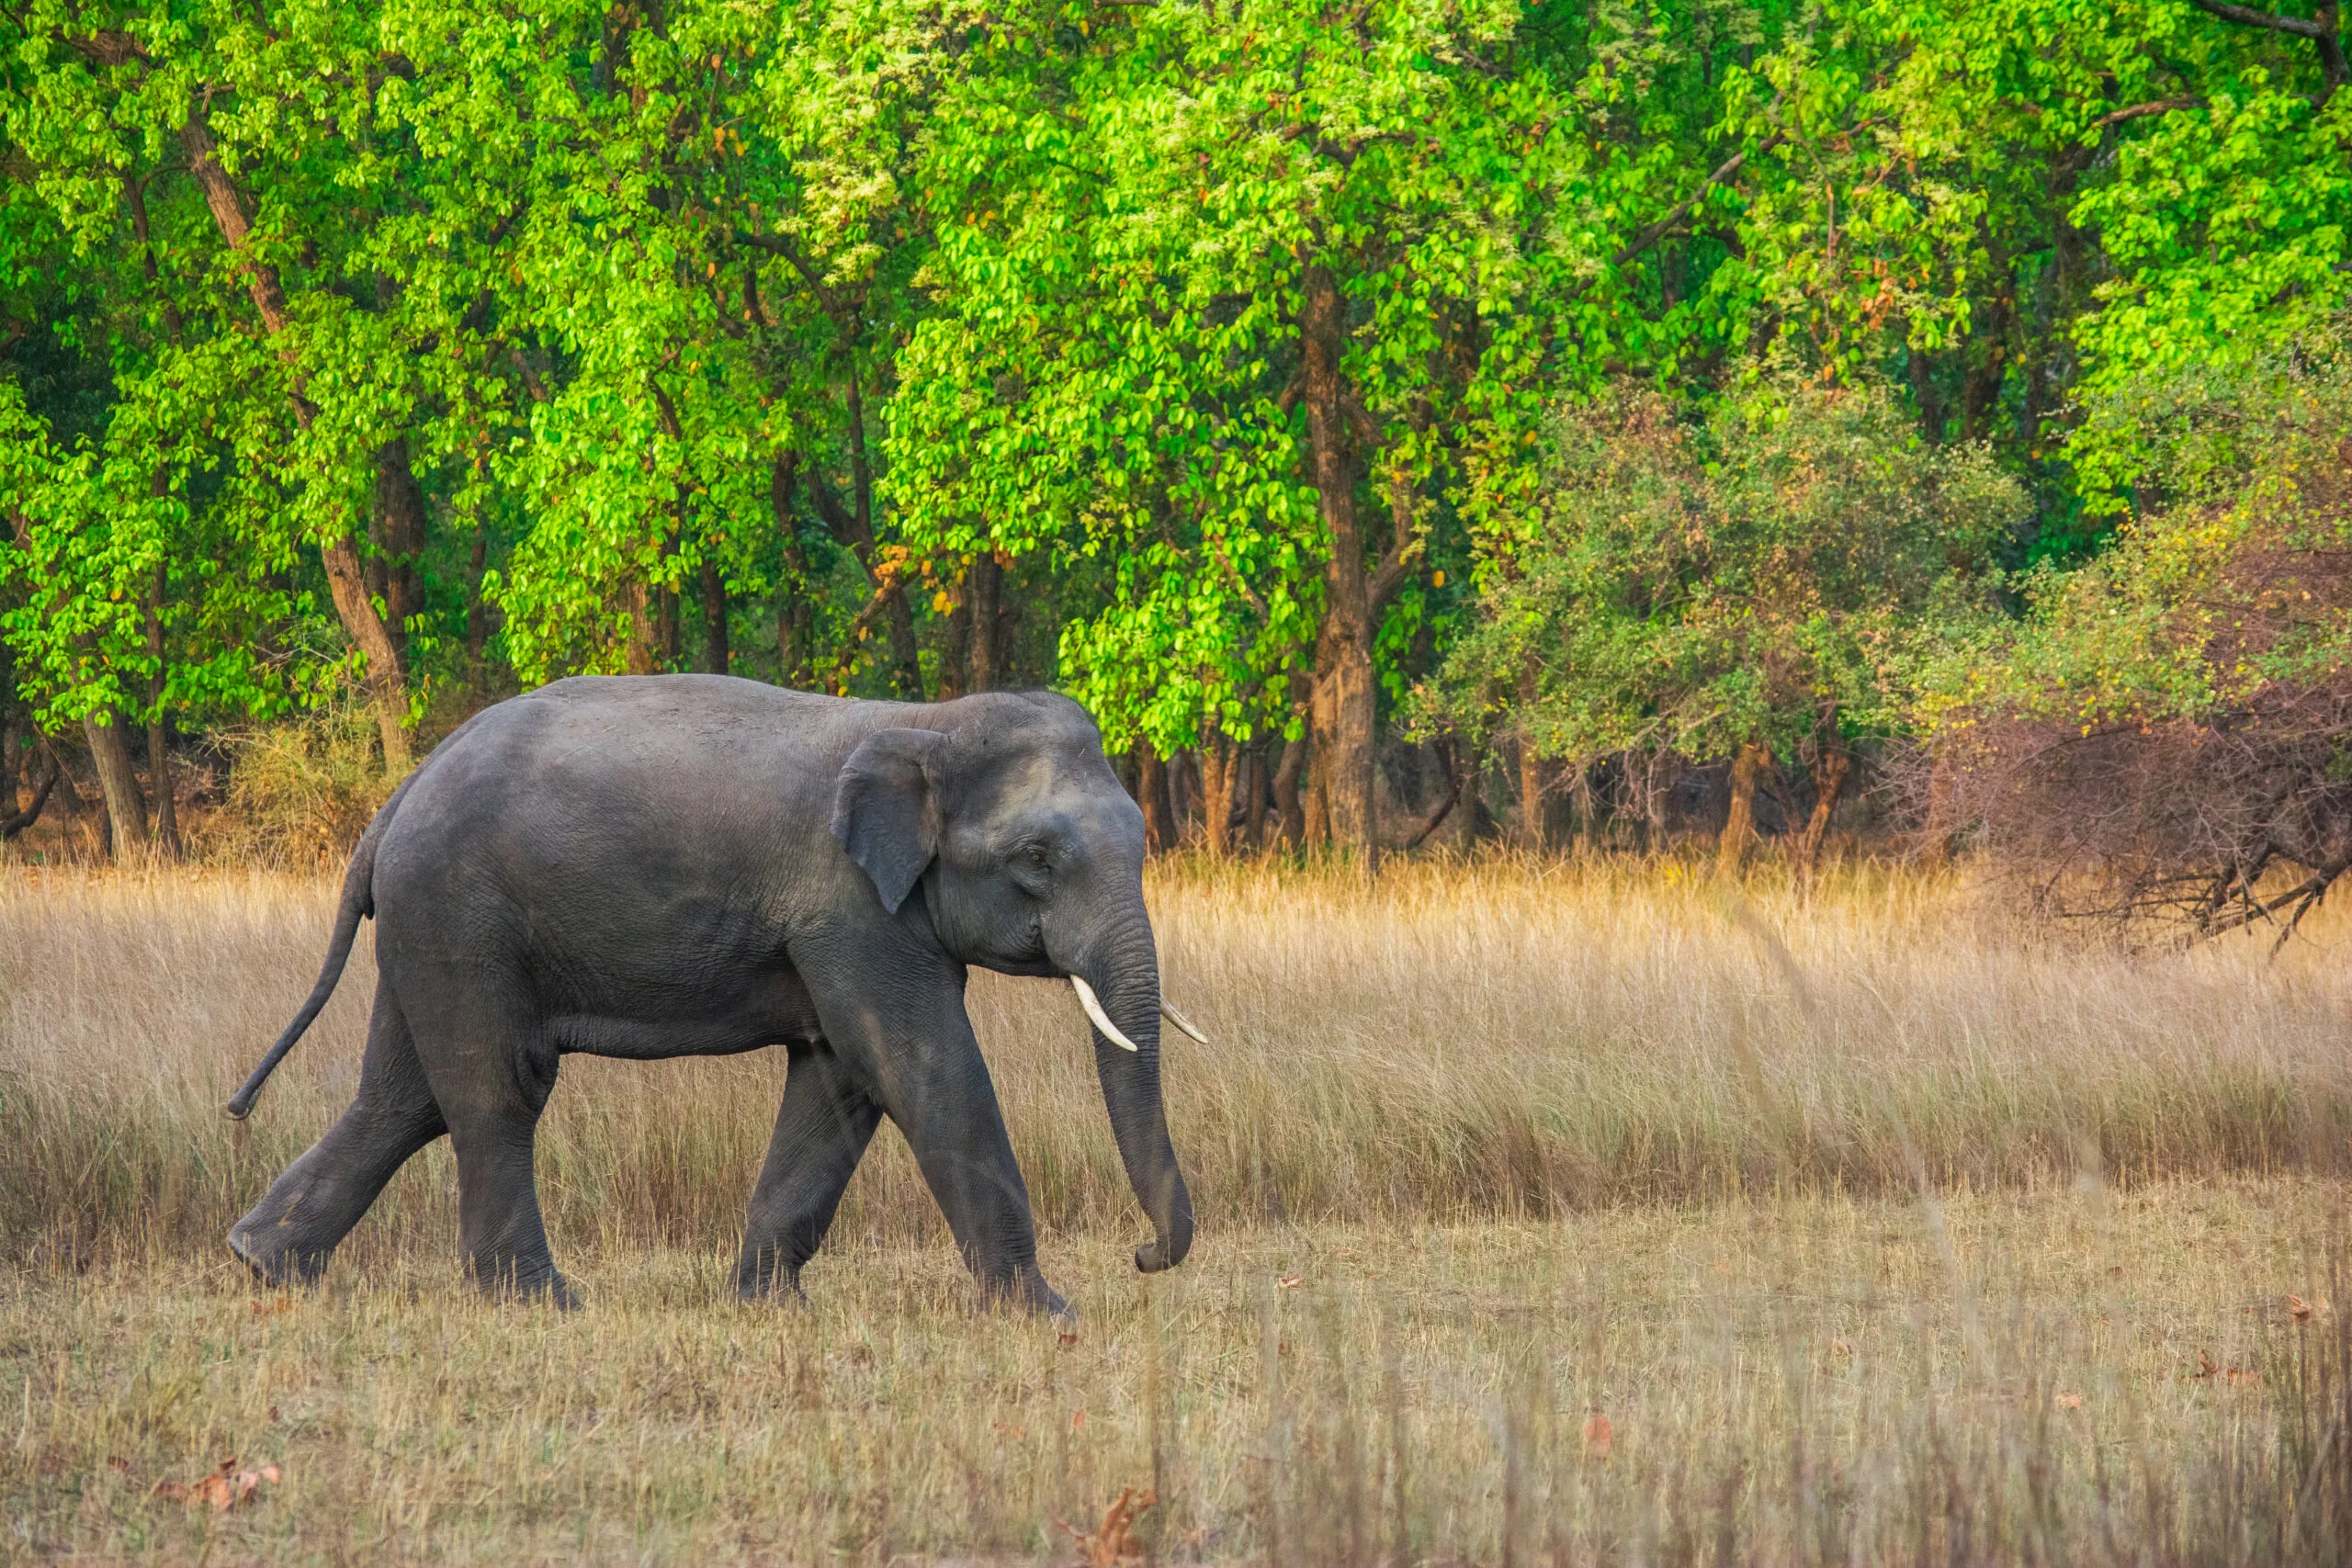 Recently a herd of wild elephants wreaked havoc and destroyed crops in the Jaldumur area near Sahudangi